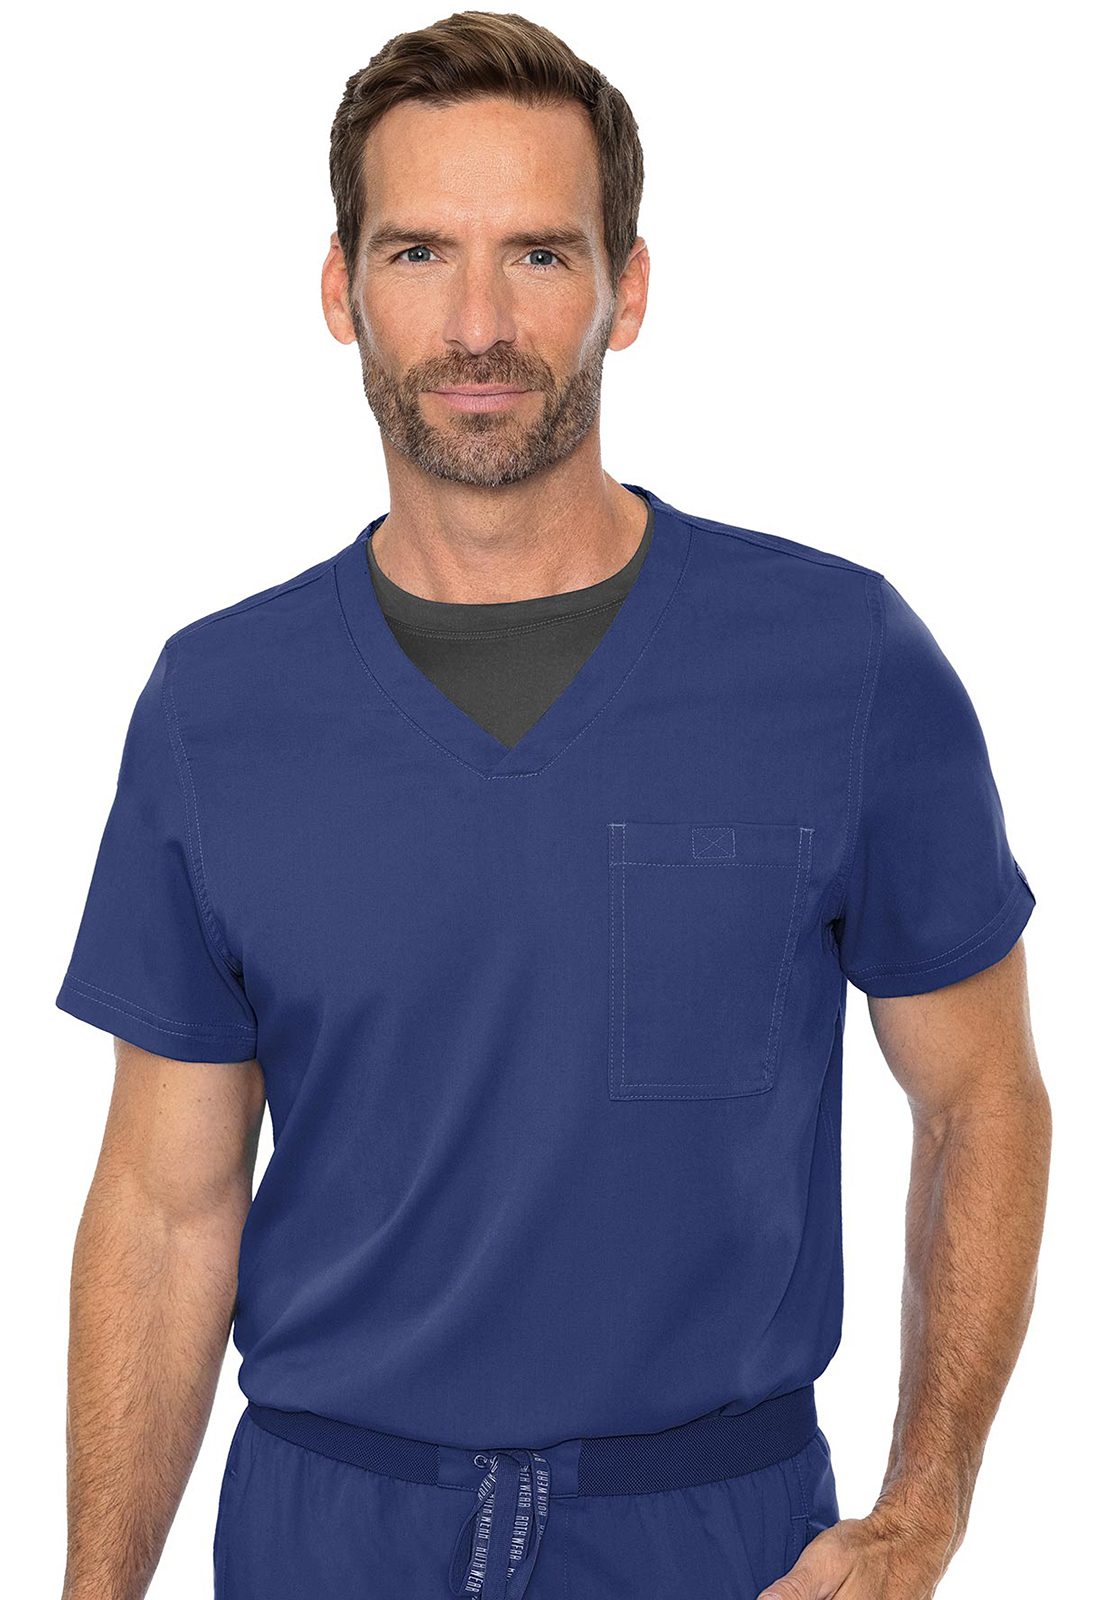 Cadence One Pocket Top-Med Couture